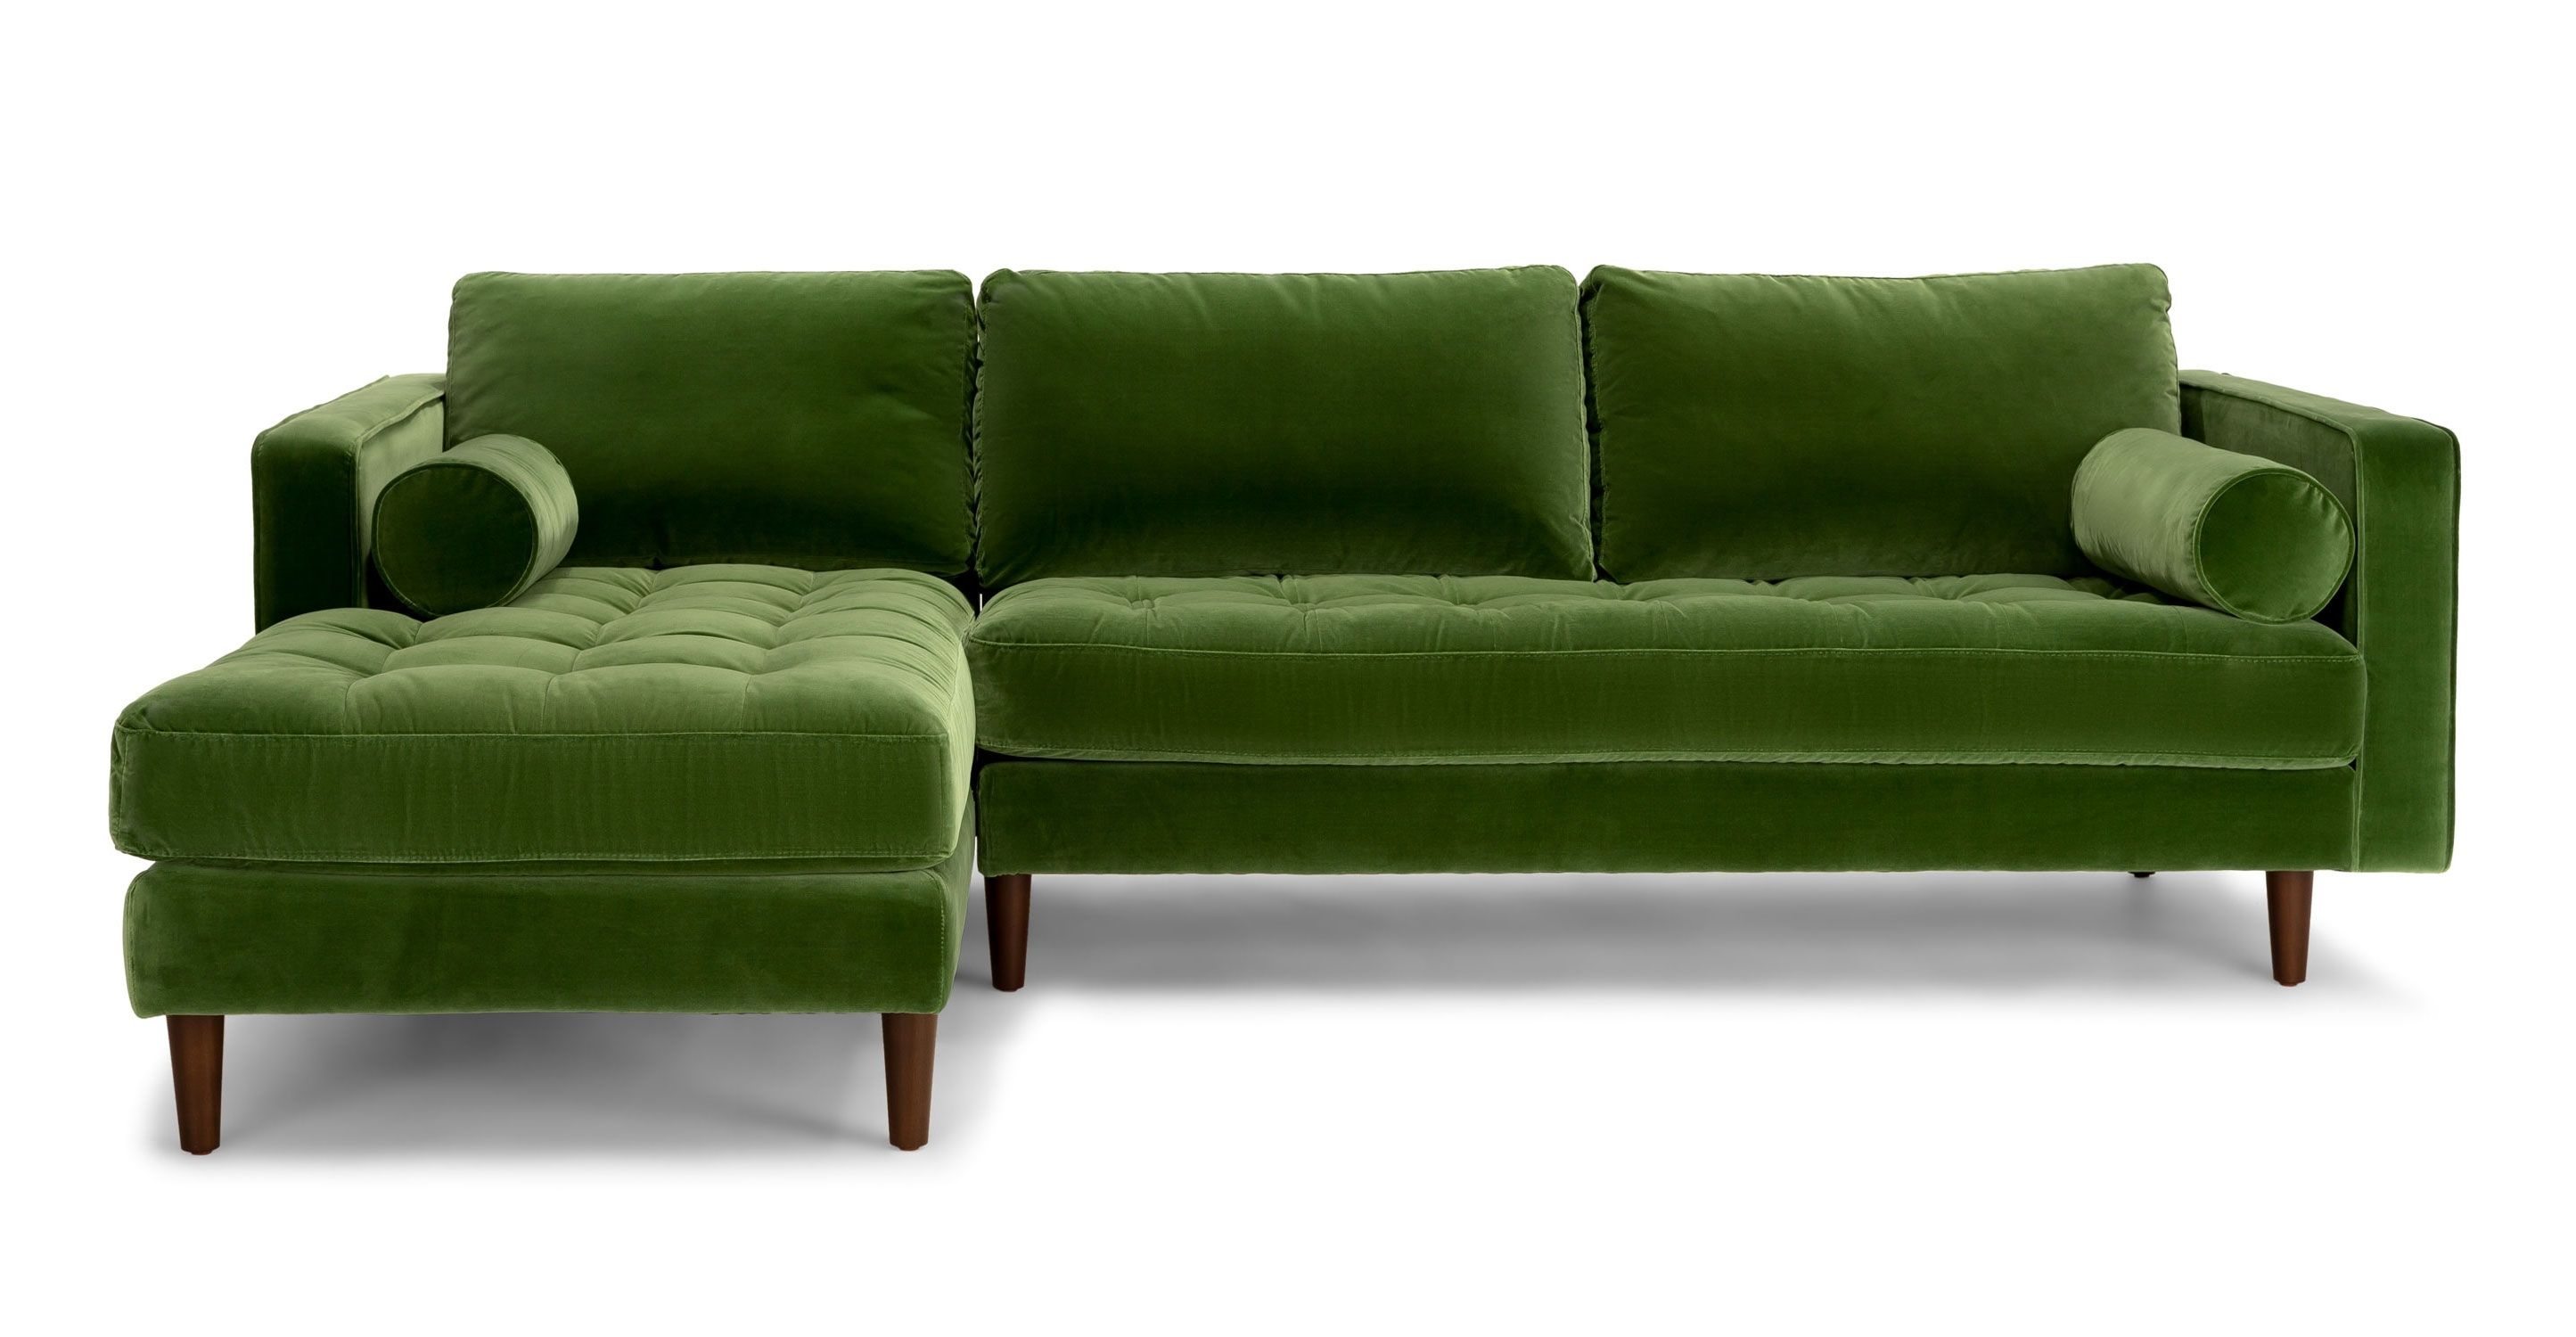 Green Sectional Sofa With Chaise – Hotelsbacau Throughout Green Sectional Sofas With Chaise (View 9 of 10)